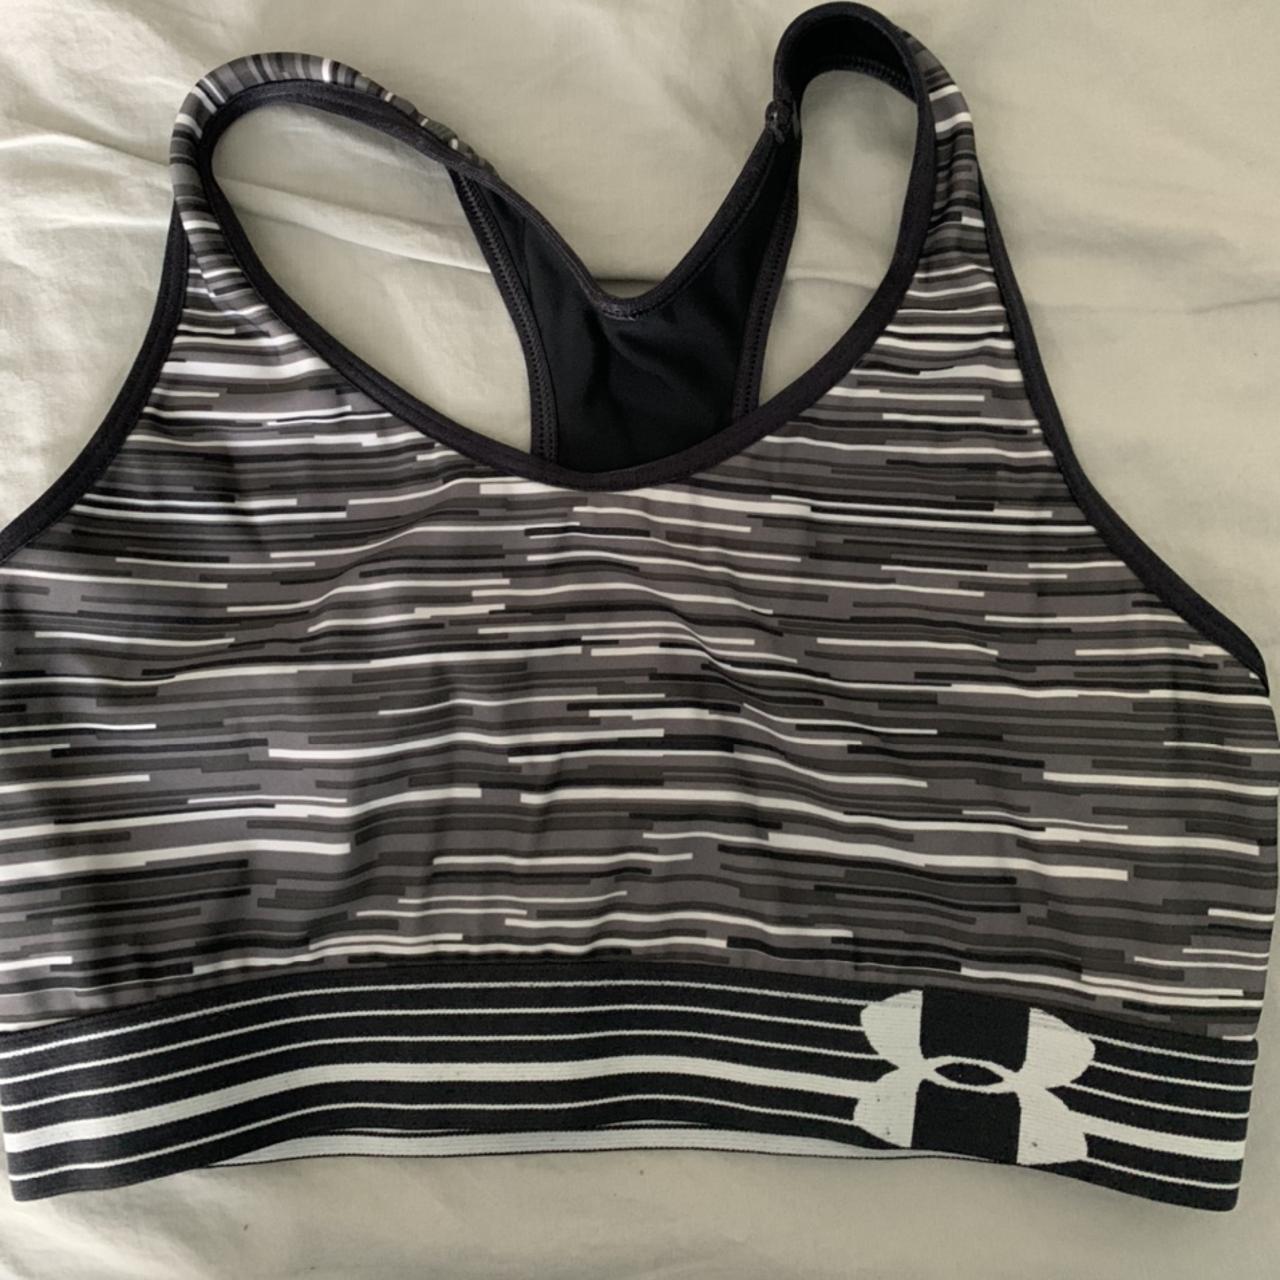 Reversible Under Armour sports bra. Small fit and - Depop